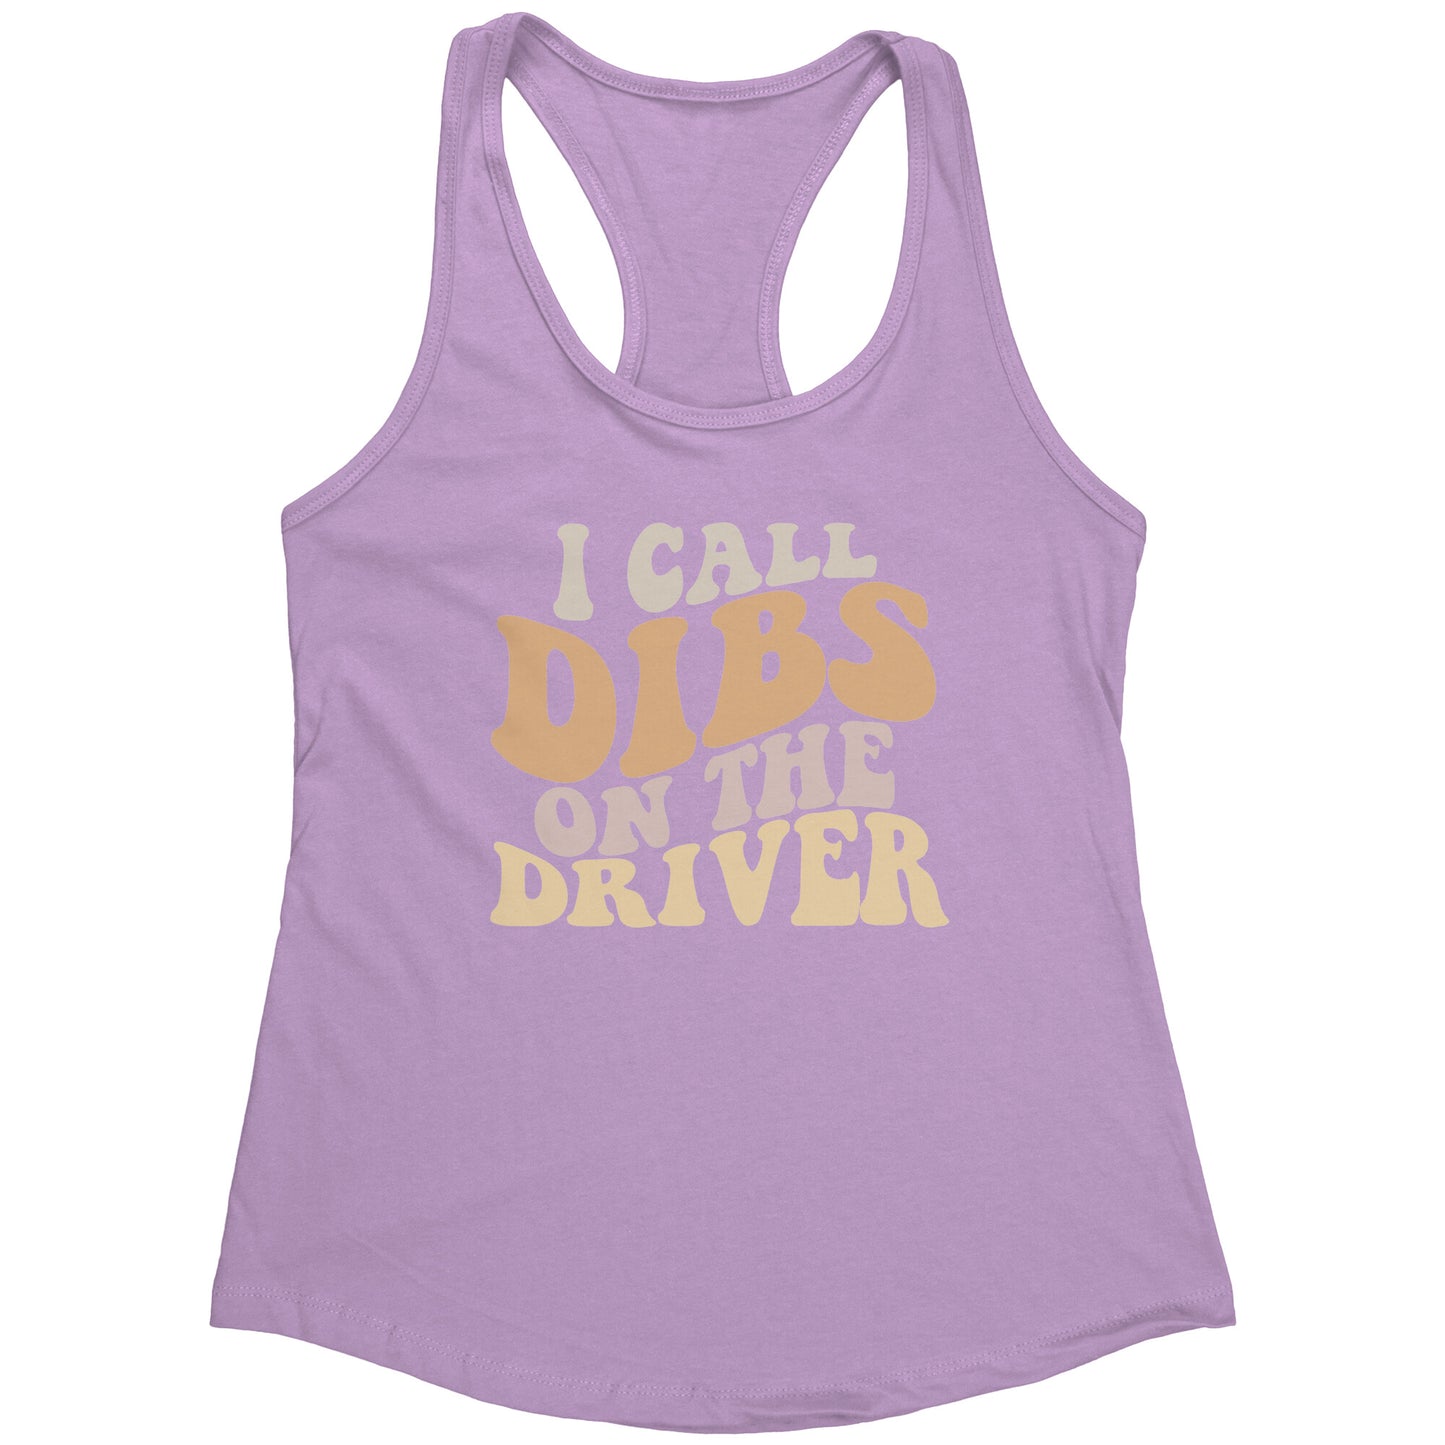 Dibs On The Driver Tank Top